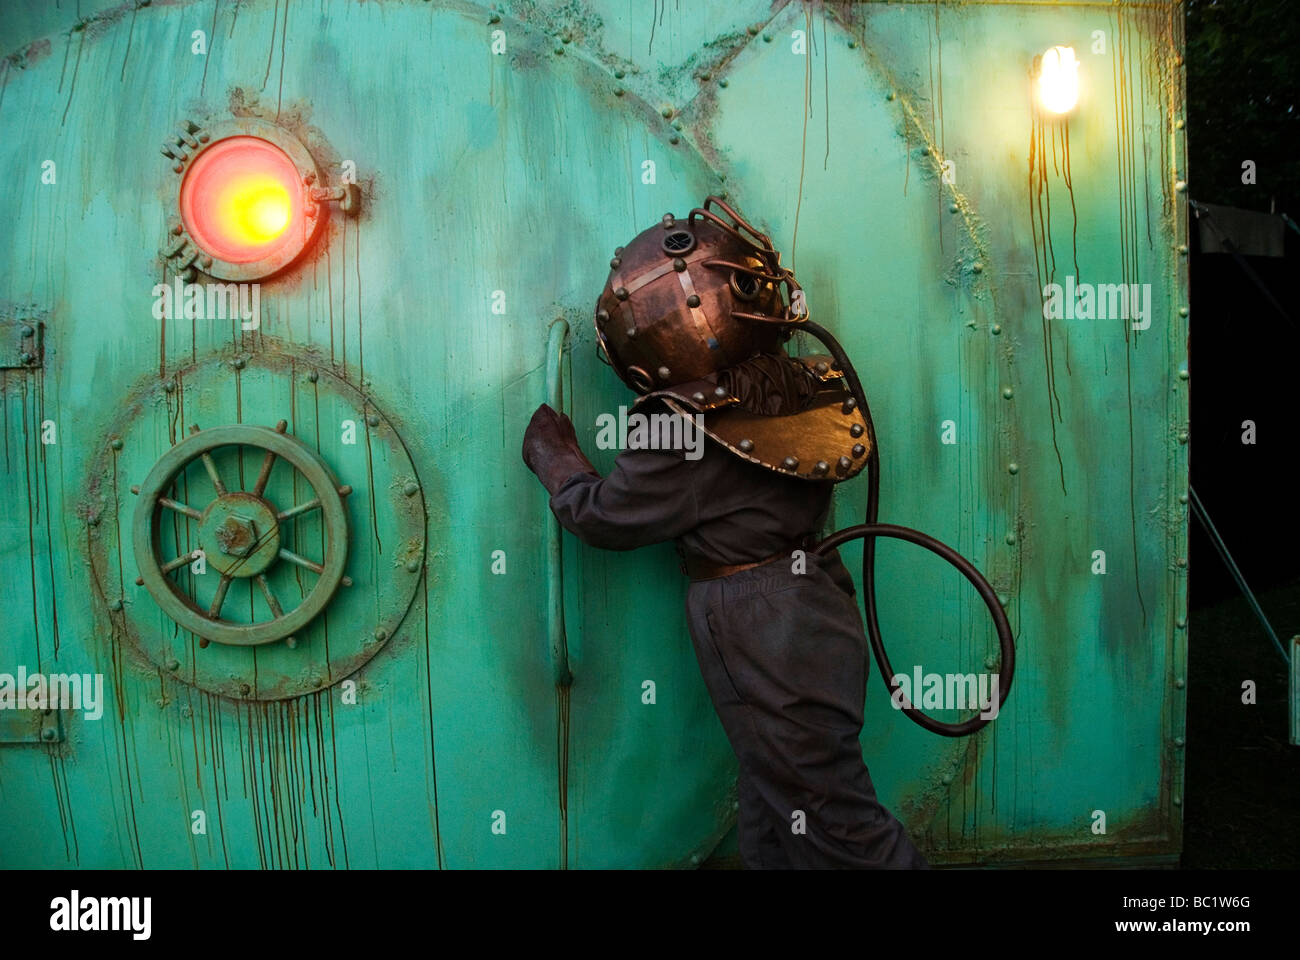 Actor dressed as deep sea diver opens the door to the Bar of Ideas Stock Photo